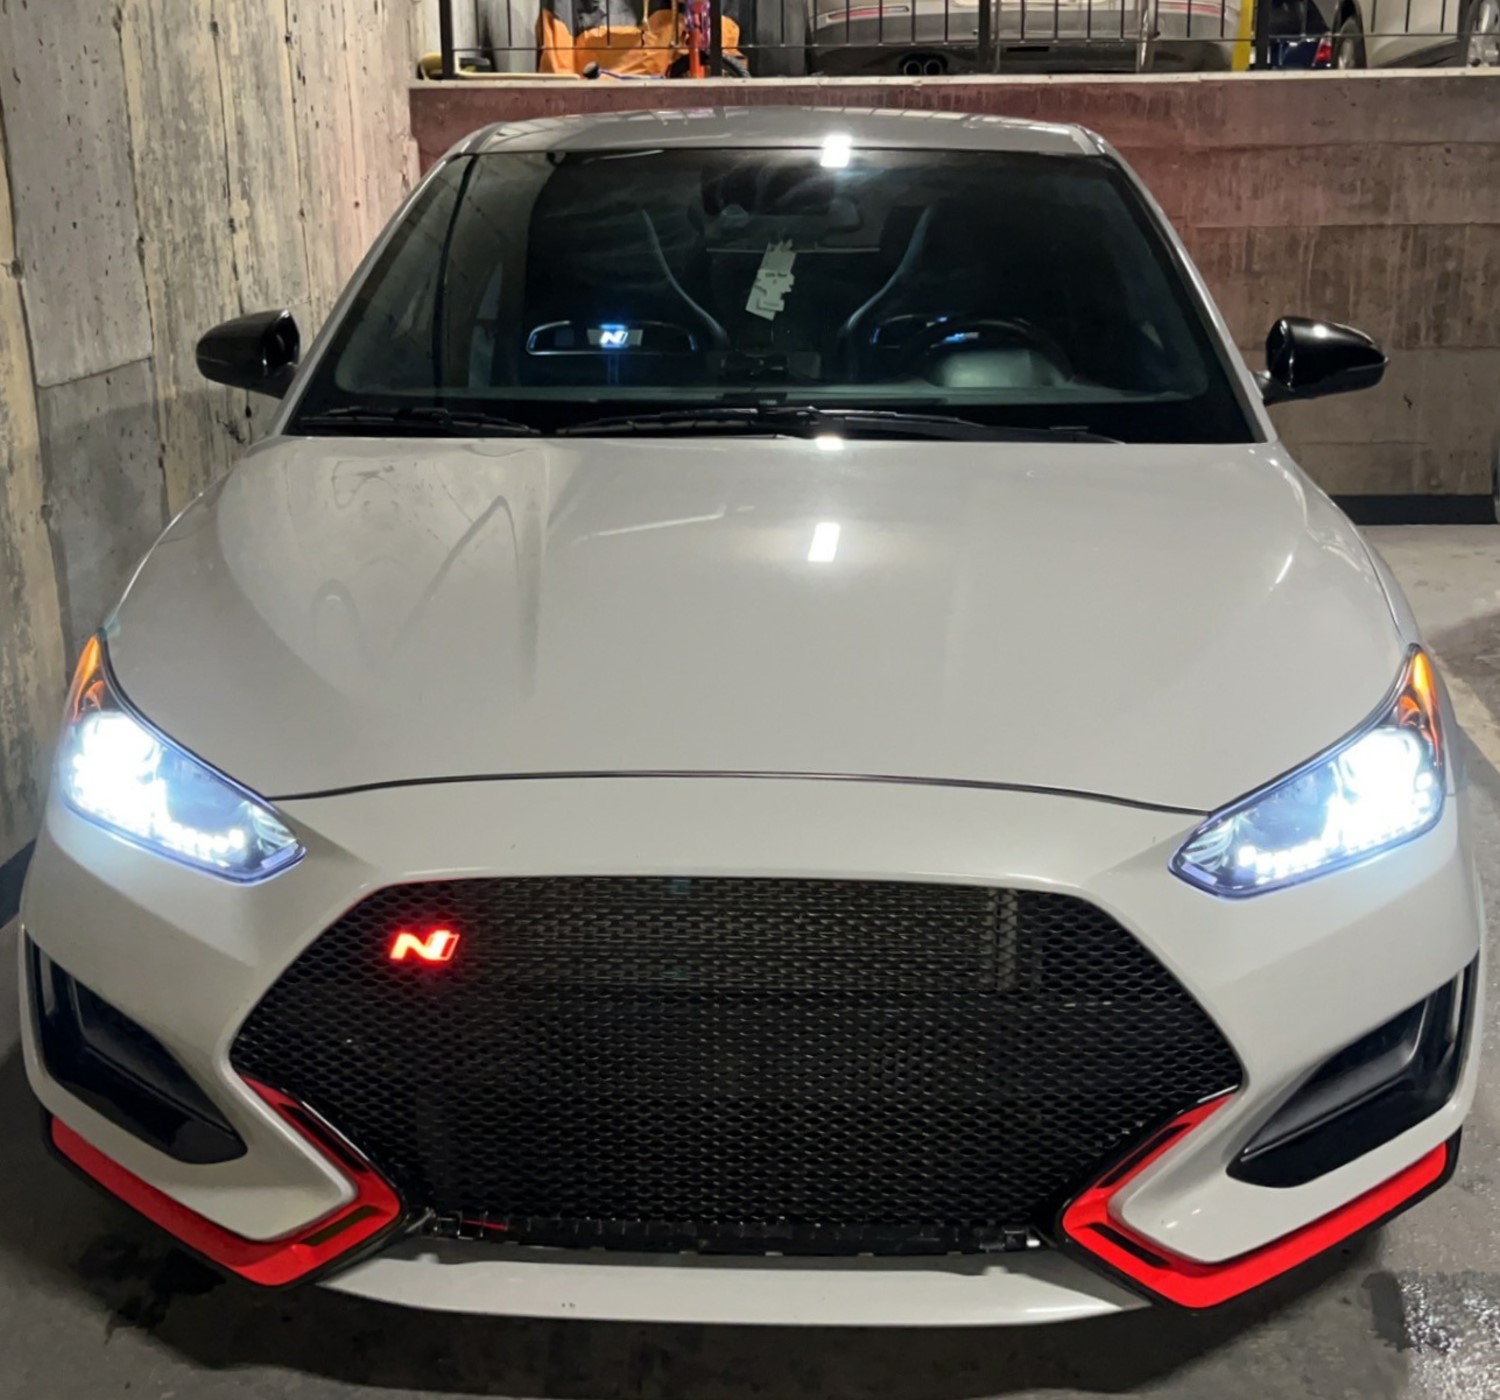 New Mesh Grille & the Perfect Opportunity to add in a New Emblem - Hyundai Veloster N with LED Emblem